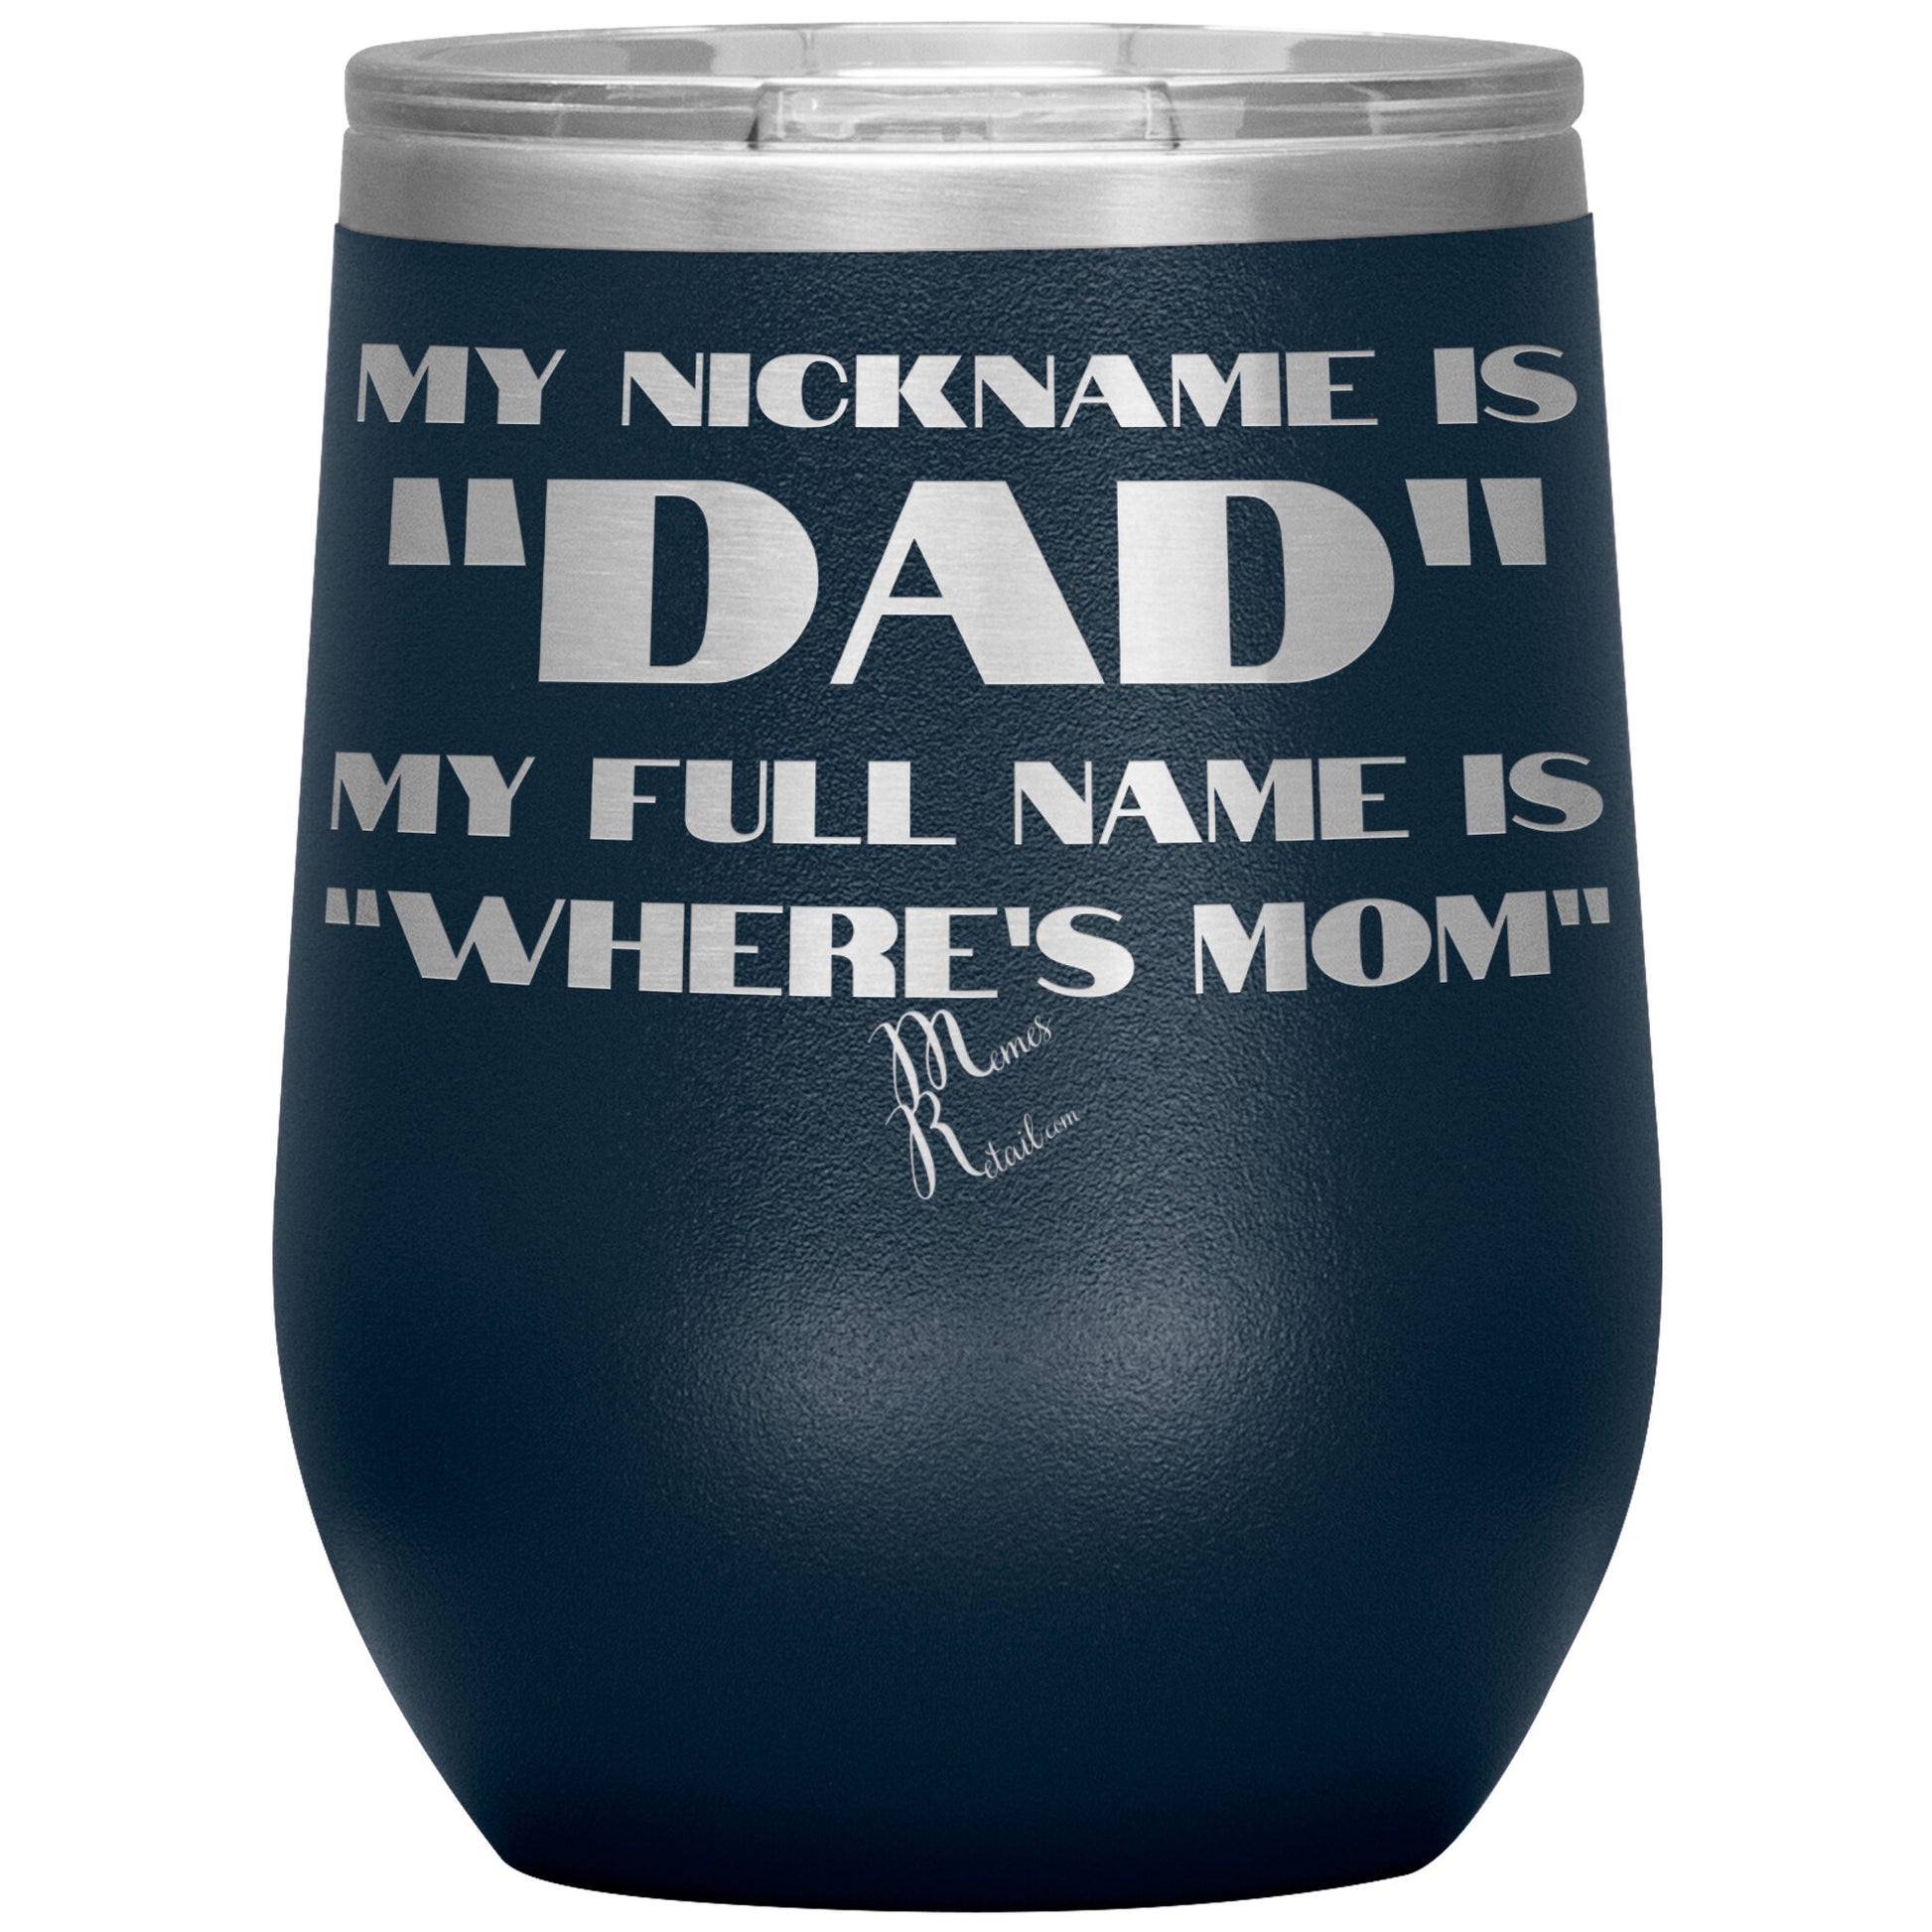 My Nickname is "Dad", My Full Name is "Where's Mom" Tumblers, 12oz Wine Insulated Tumbler / Navy - MemesRetail.com